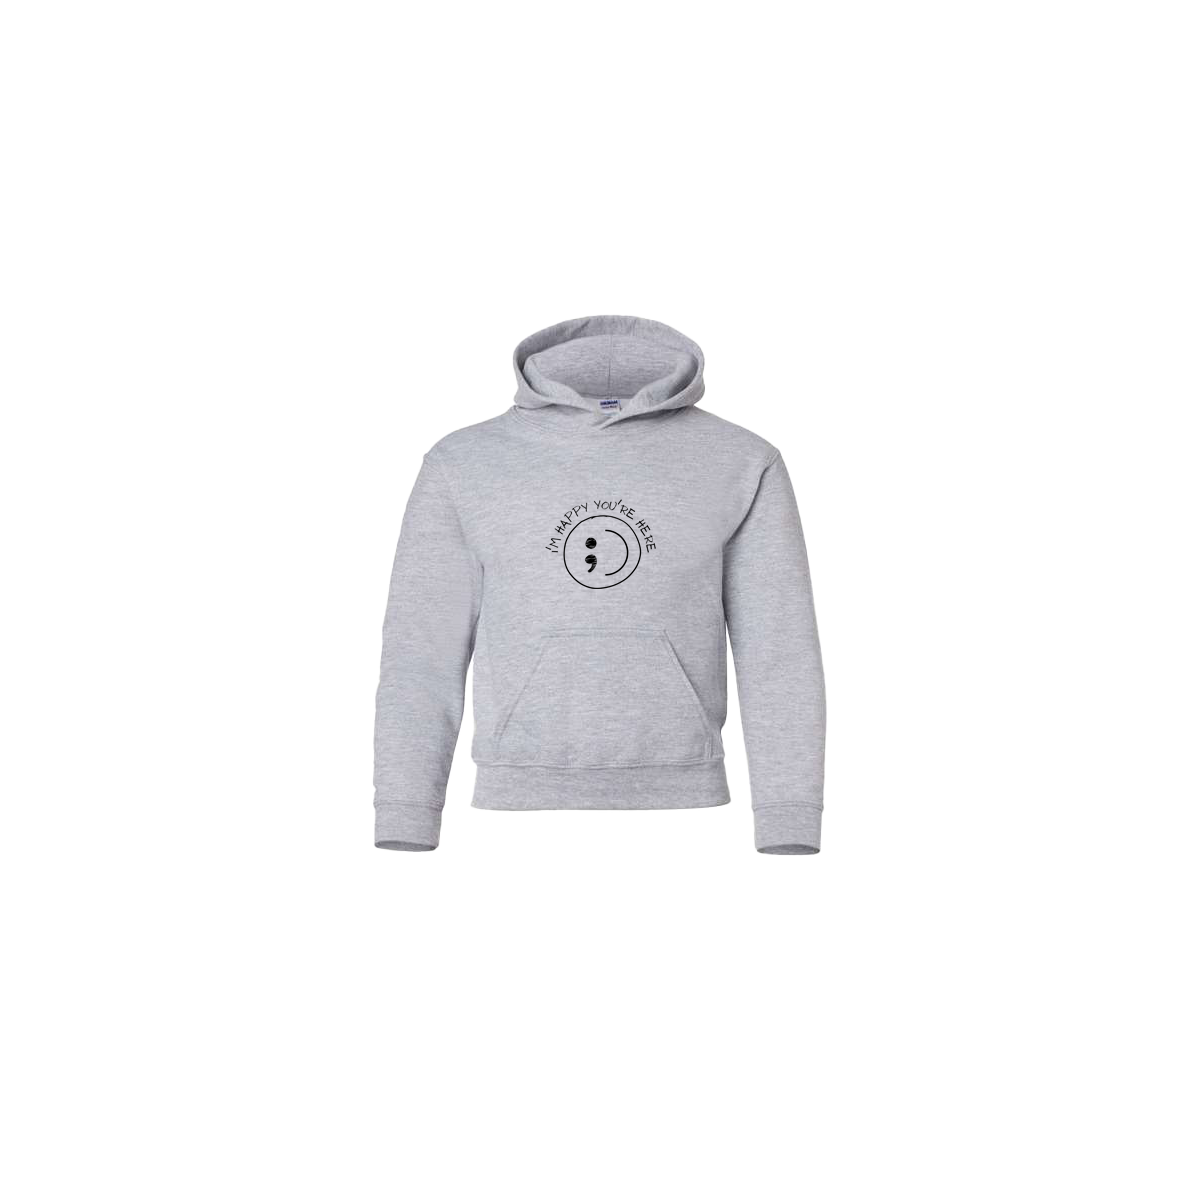 I'm Happy You're Here Embroidered Grey Youth Hoodie